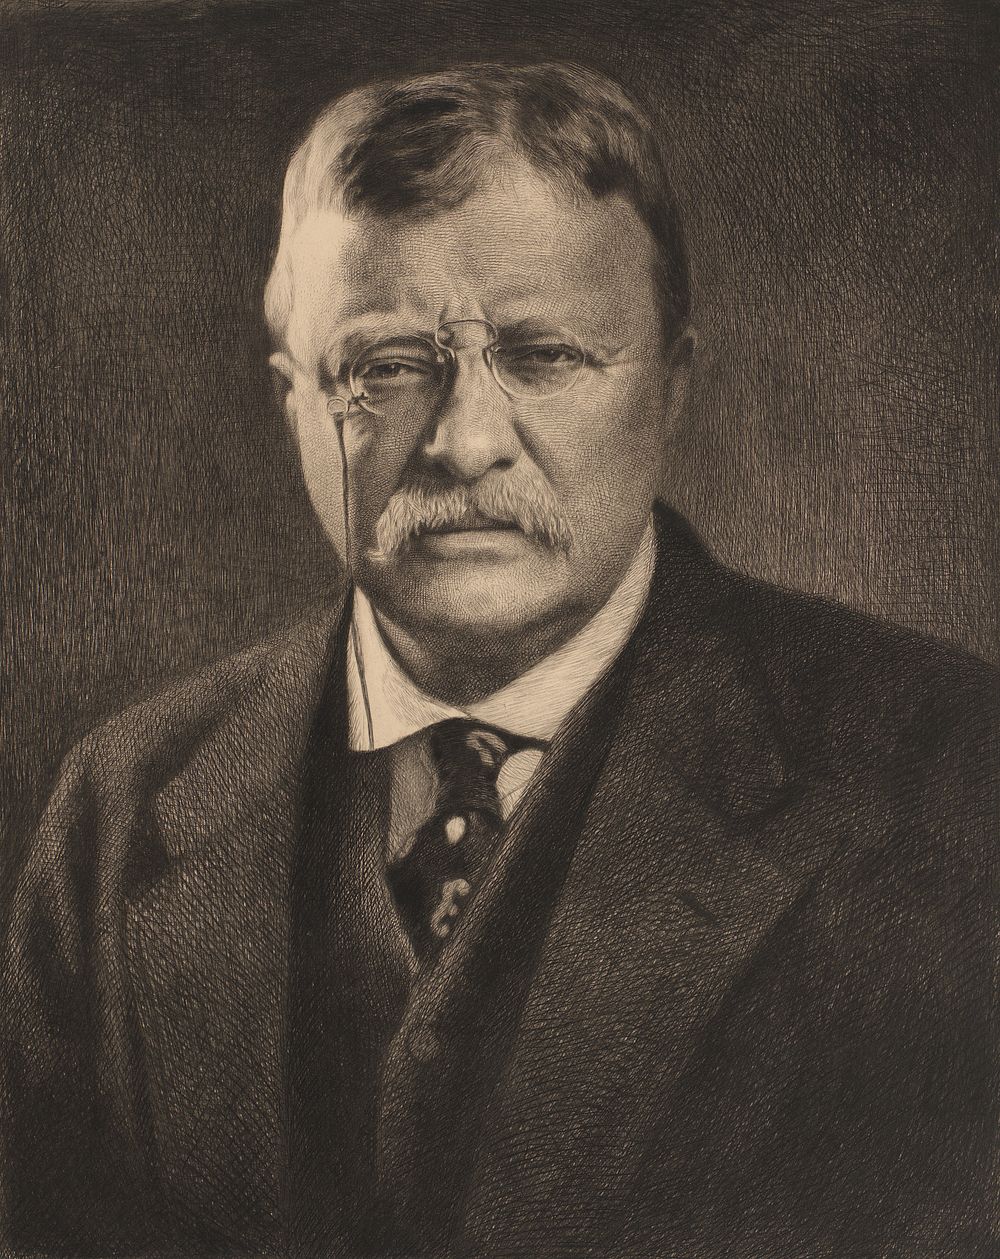 Theodore Roosevelt, James S. King